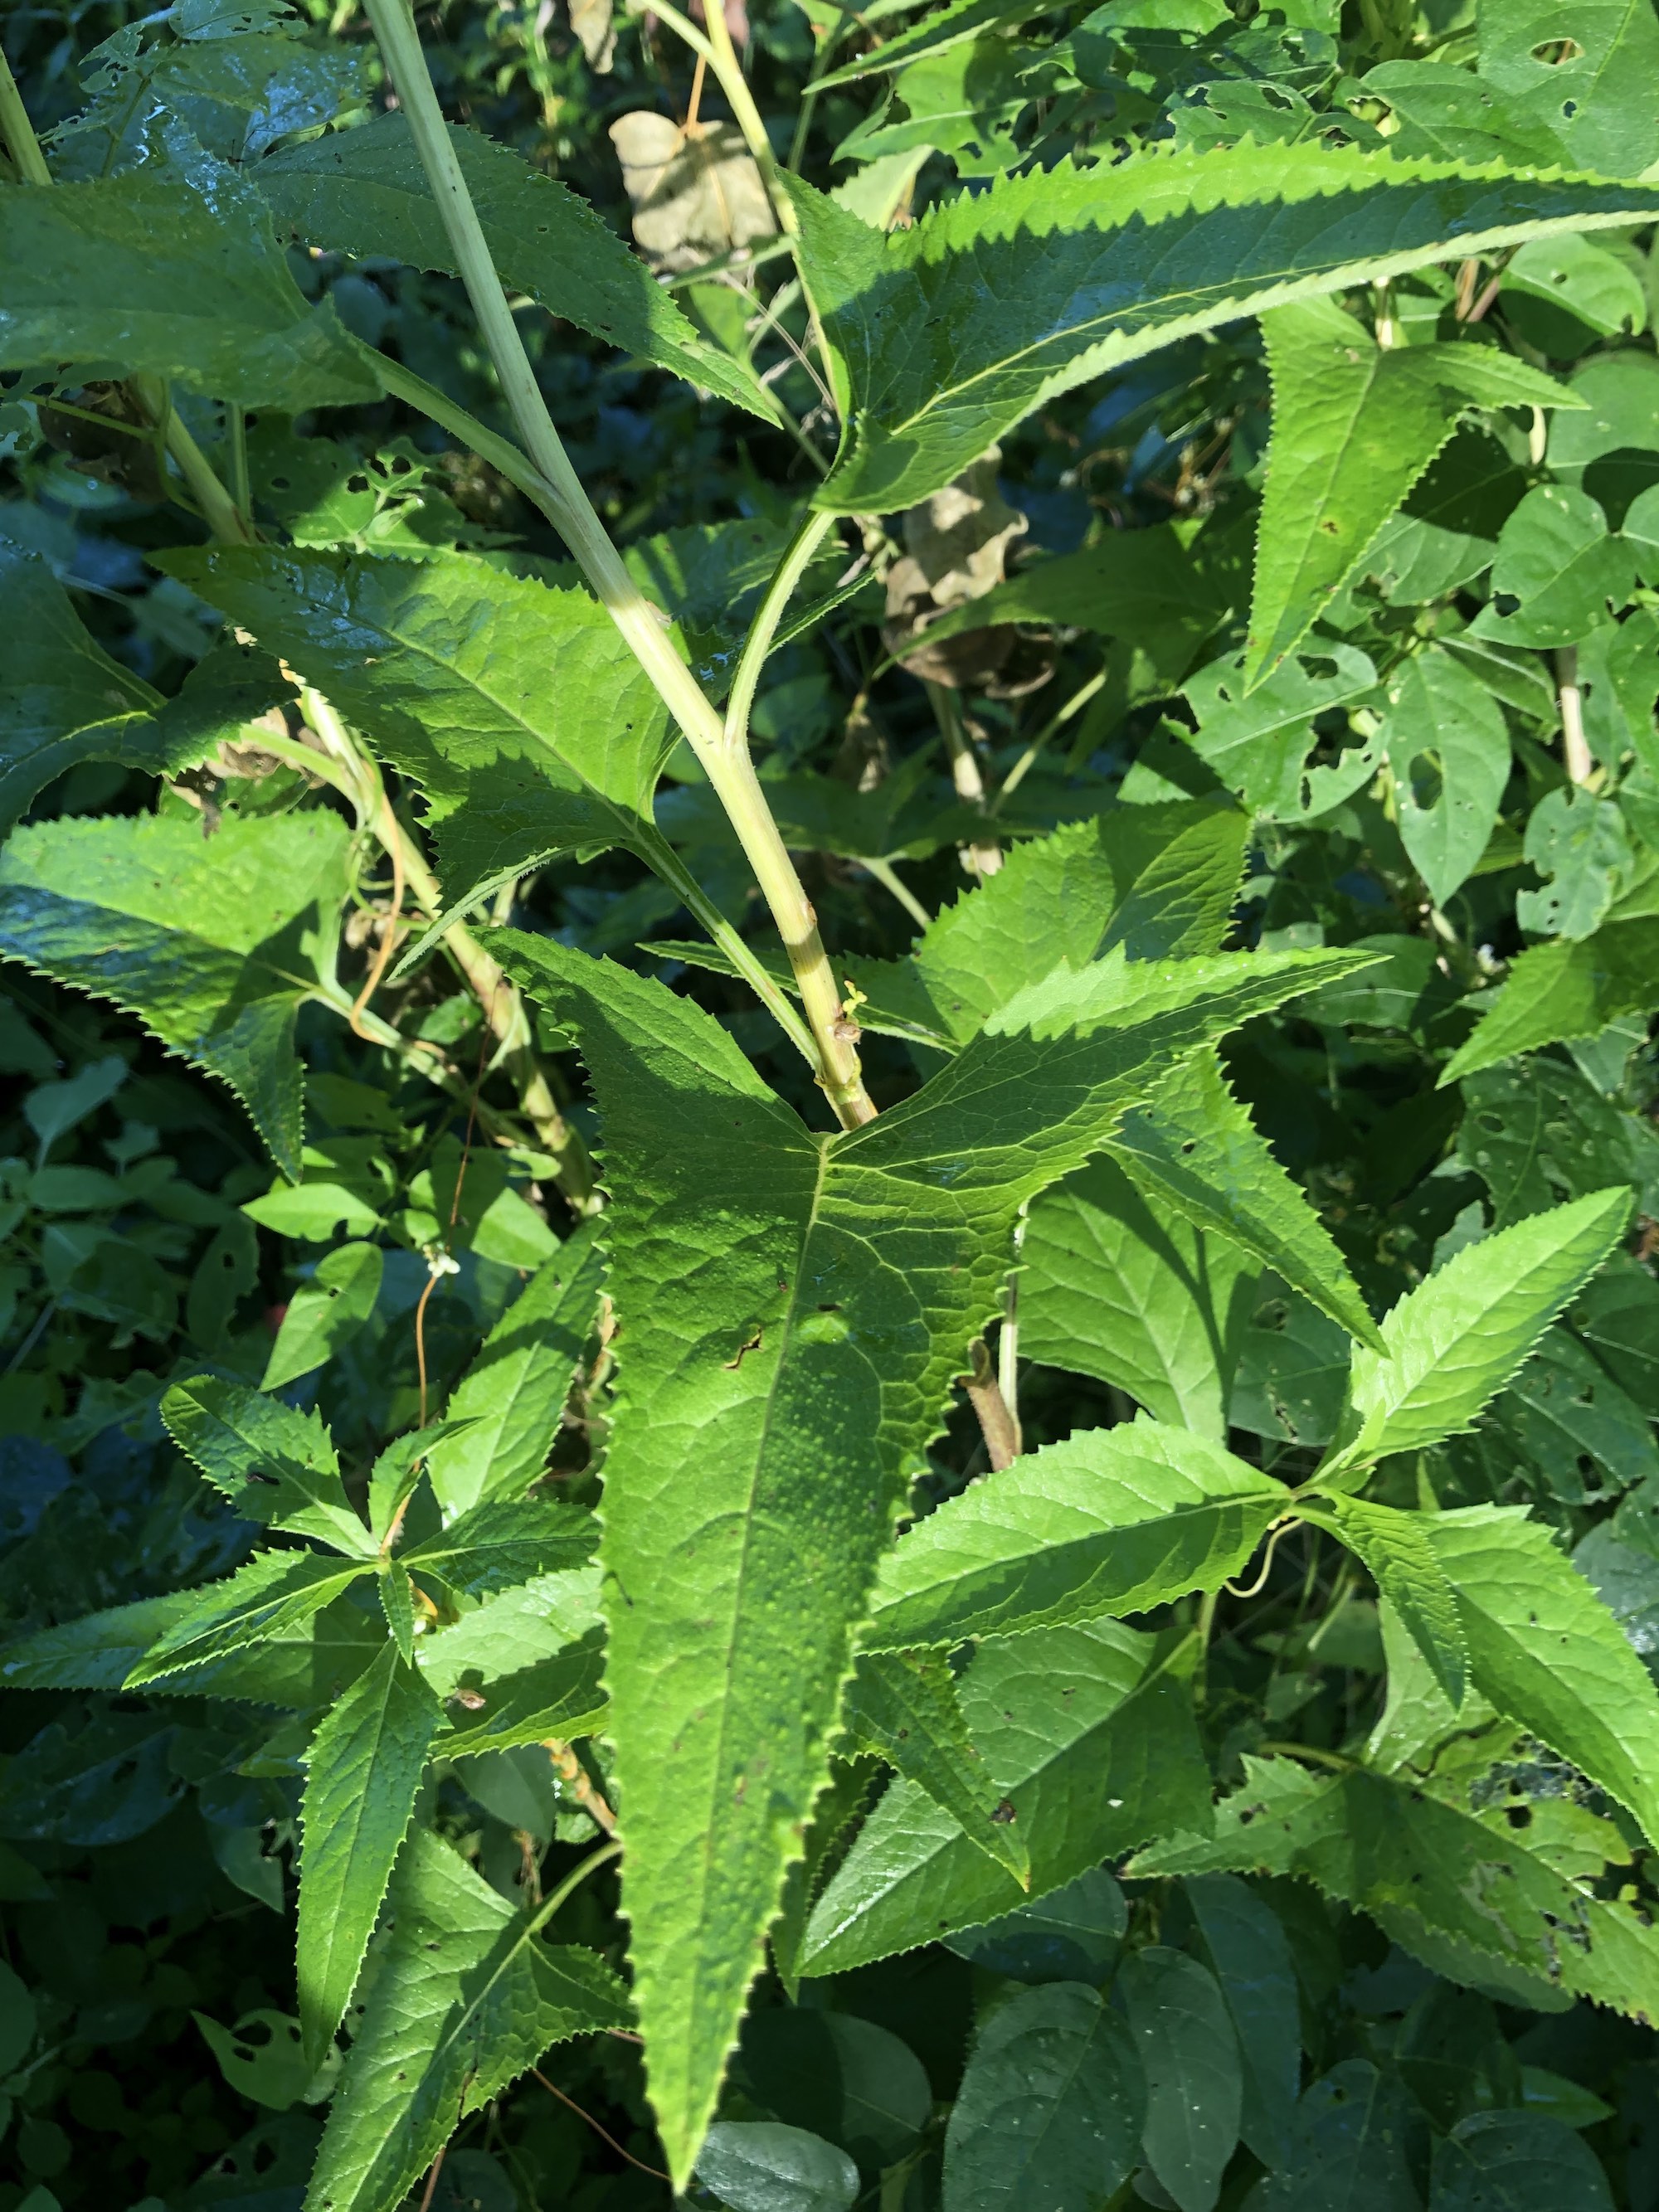 Sweet Indian Plantain lower pear-shaped leaves by Council Ring Spring and along Ho Nee Um boardwalk in Madison, Wisconsin on August 12, 2020.